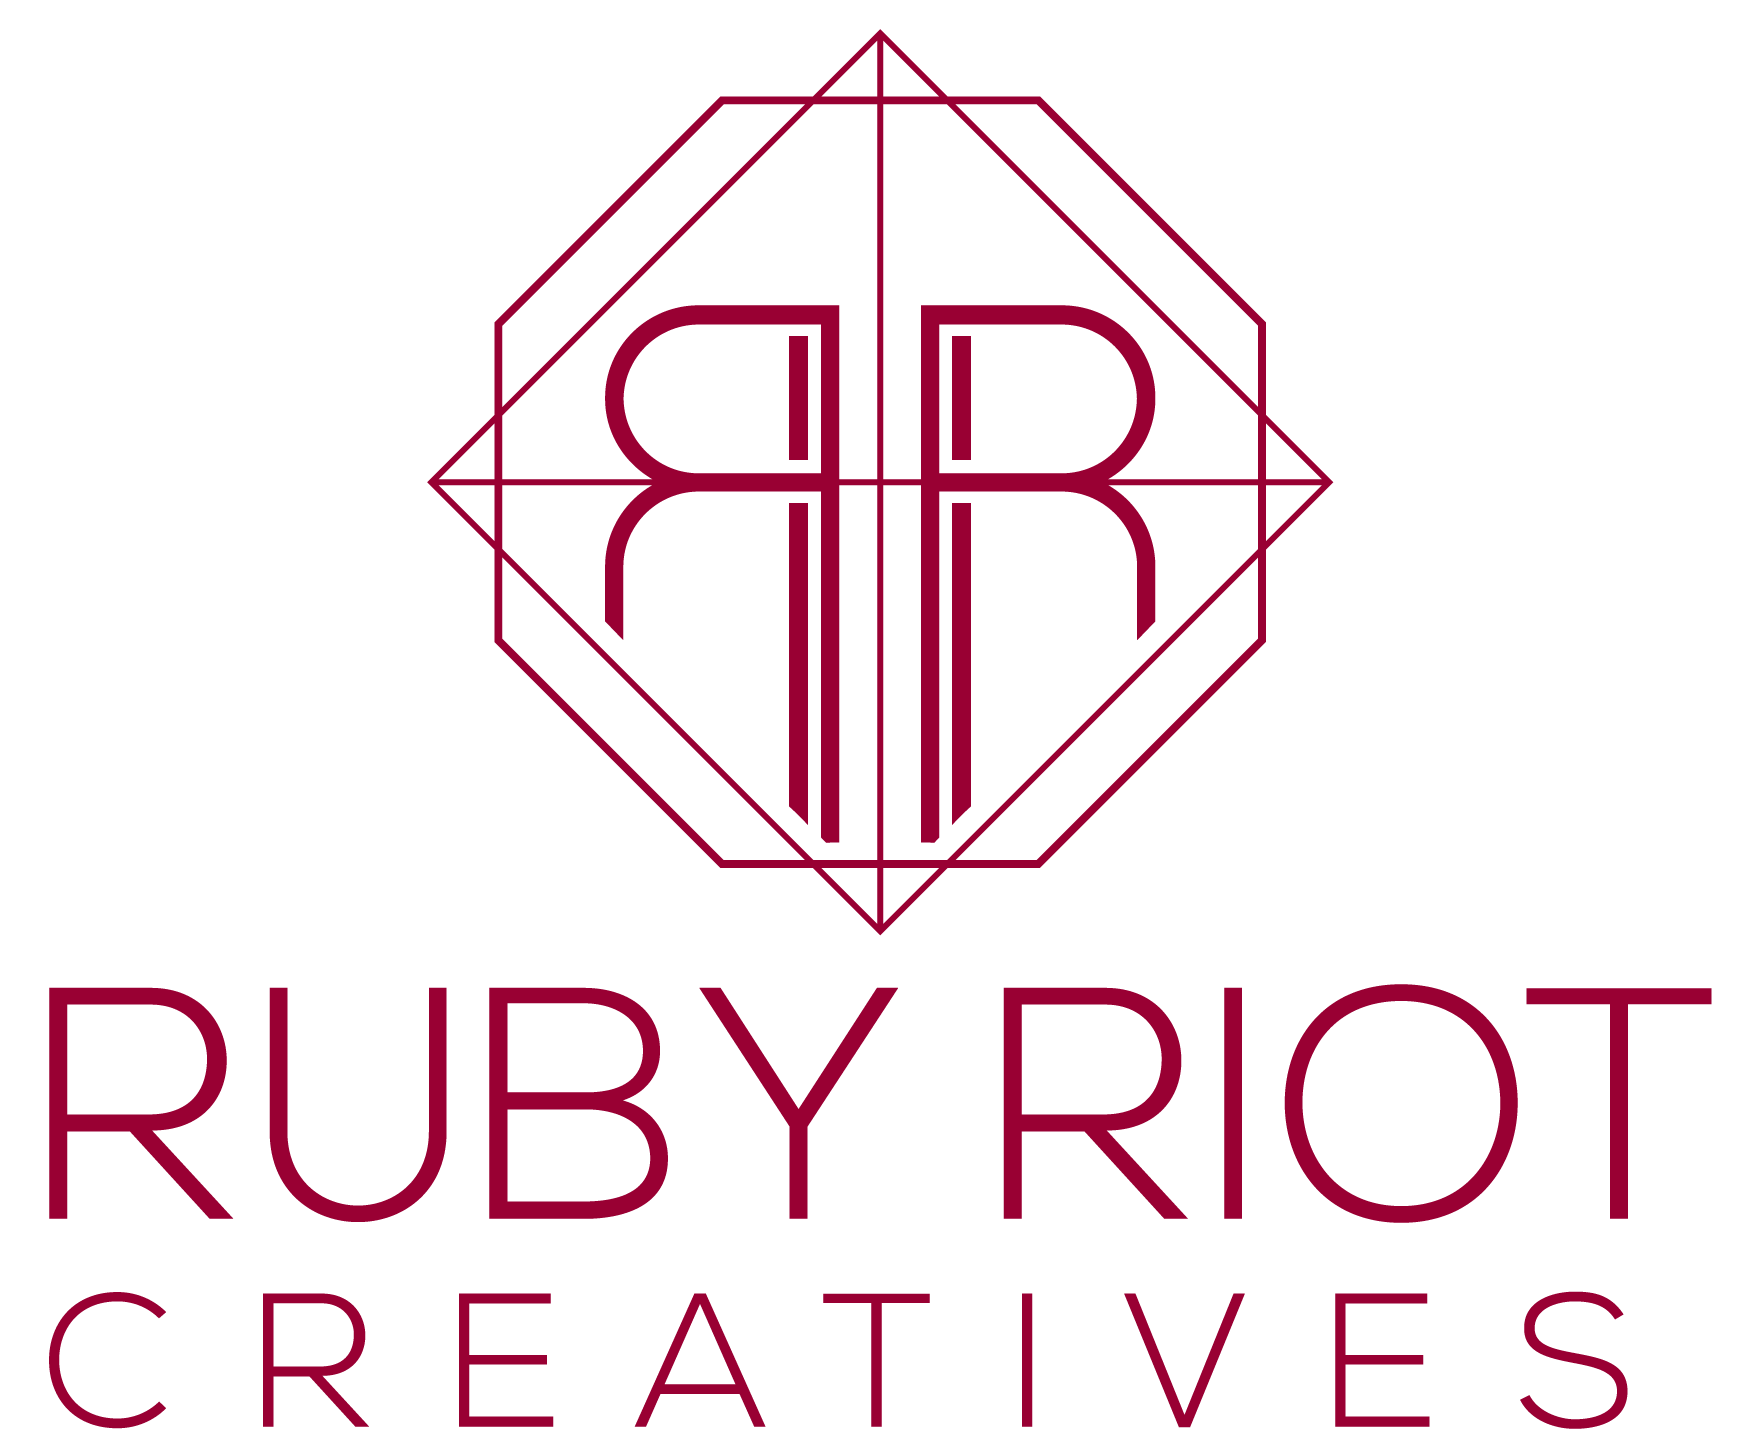 RUBY RIOT CREATIVES Austin, Texas Based Video Production + Photographer.